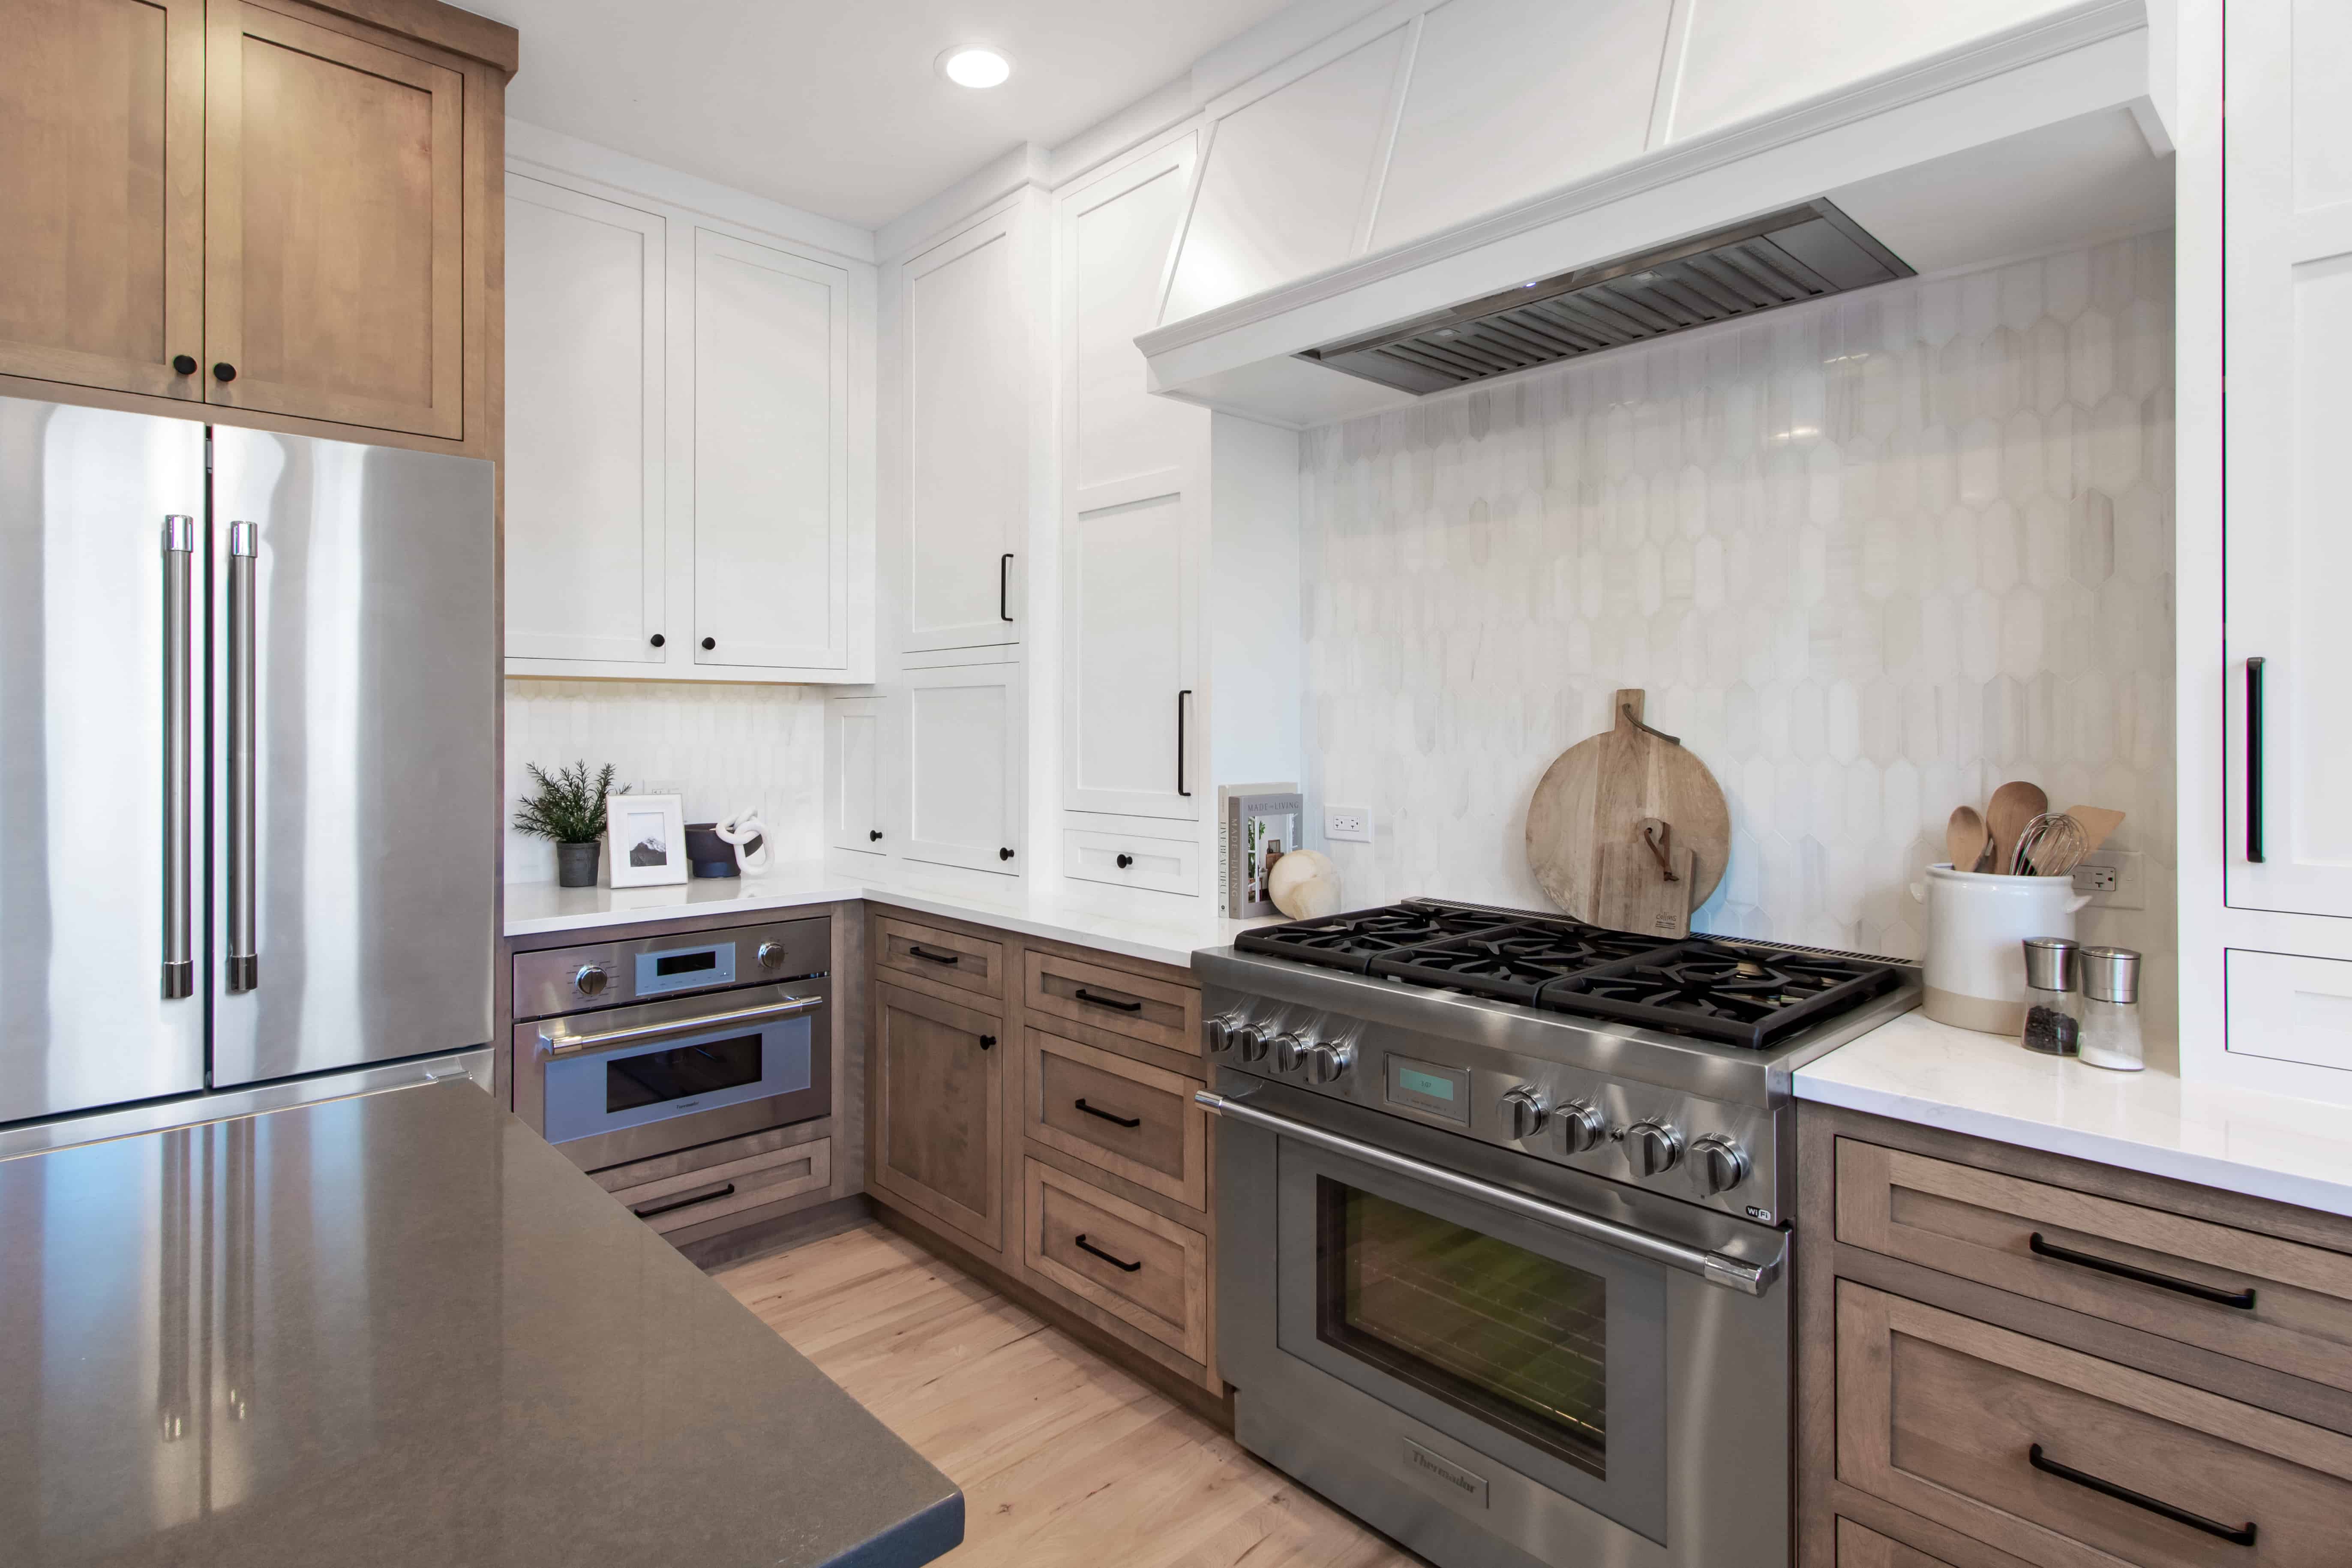 Kitchen Remodeling Project located in Long Grove, Illinois